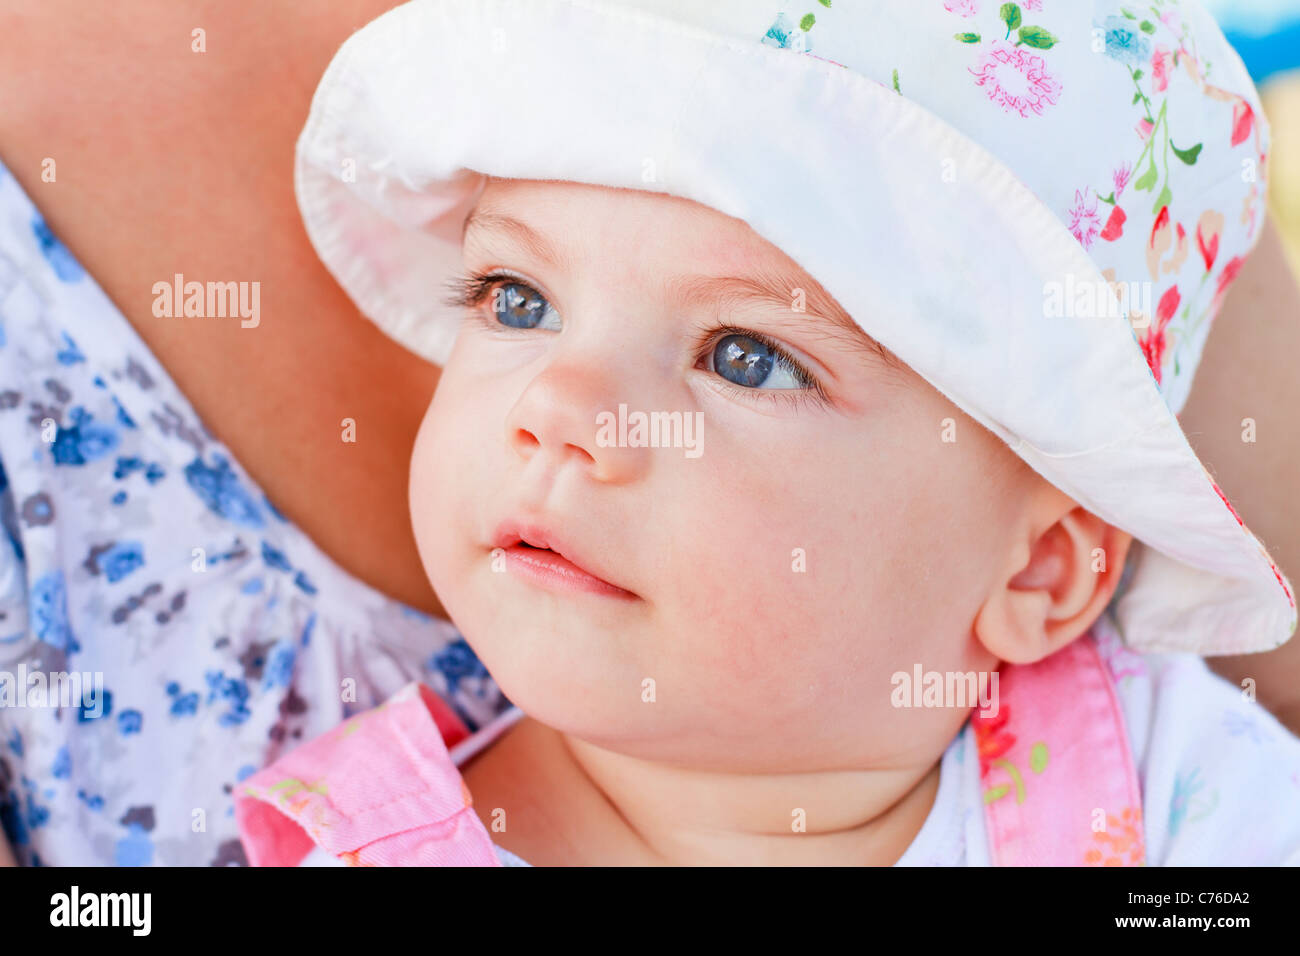 Sweet baby girl with blue eyes Banque D'Images